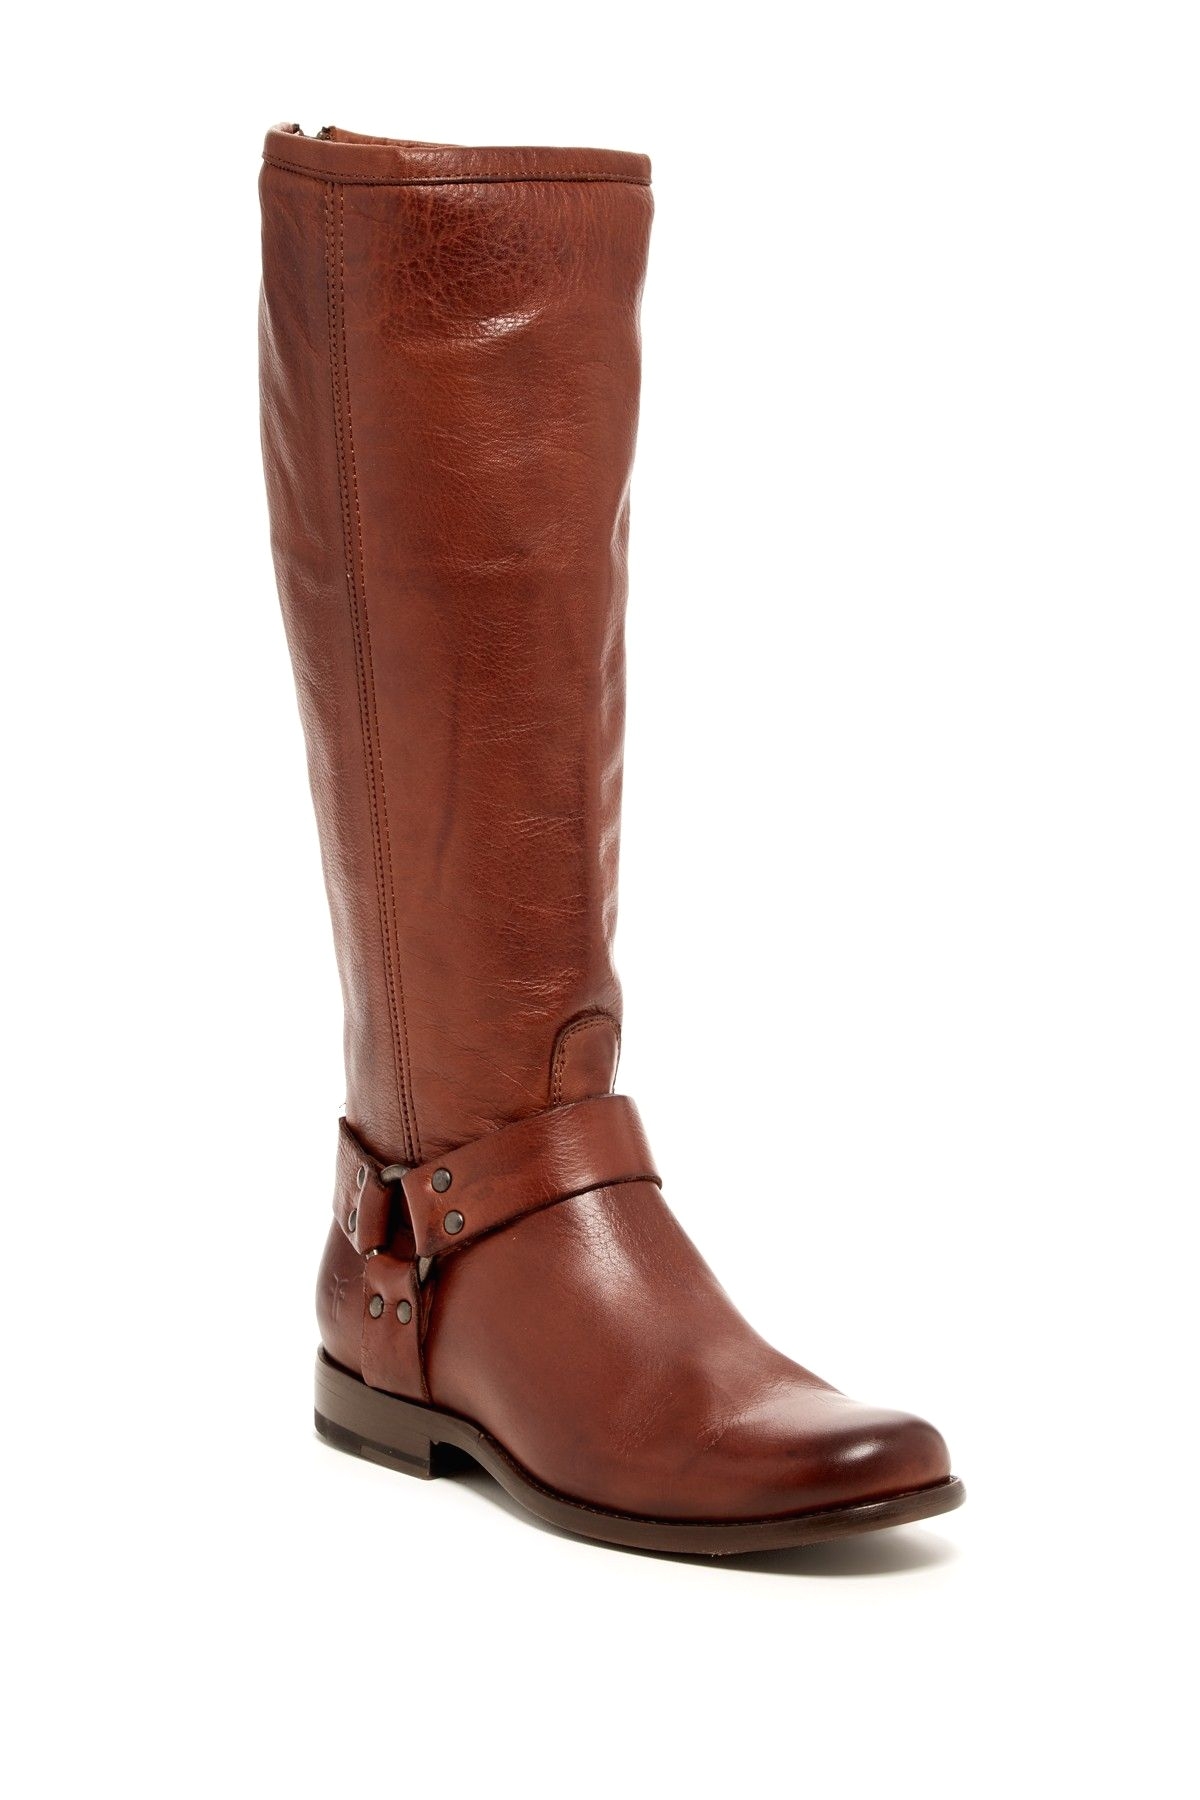 frye phillip harness tall boot at nordstrom rack free shipping on orders over 100